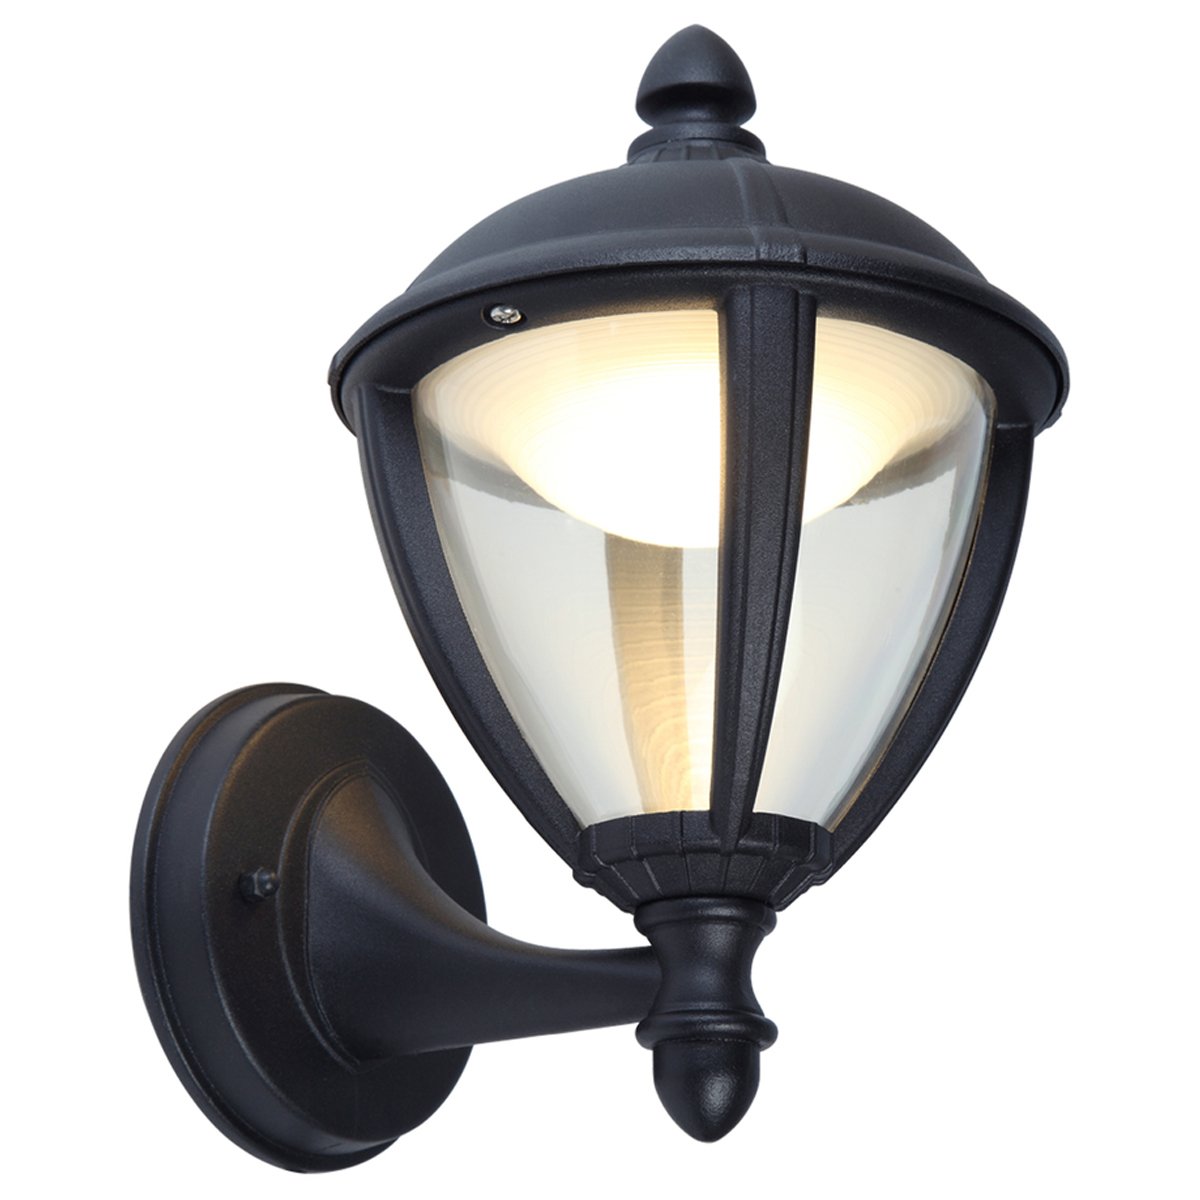 Our Cindy lantern wall light delivers on style and durability and is a smart choice for your exterior lighting. With its black aluminium construction teamed with clear panes, this lantern is hardwearing and rust and weatherproof. Built for life outdoors, it has an IP44 rating which means it can withstand the harshest of weather conditions. For sophisticated yet robust outdoor lighting, our Cindy black outdoor traditional lantern is a strong contender.